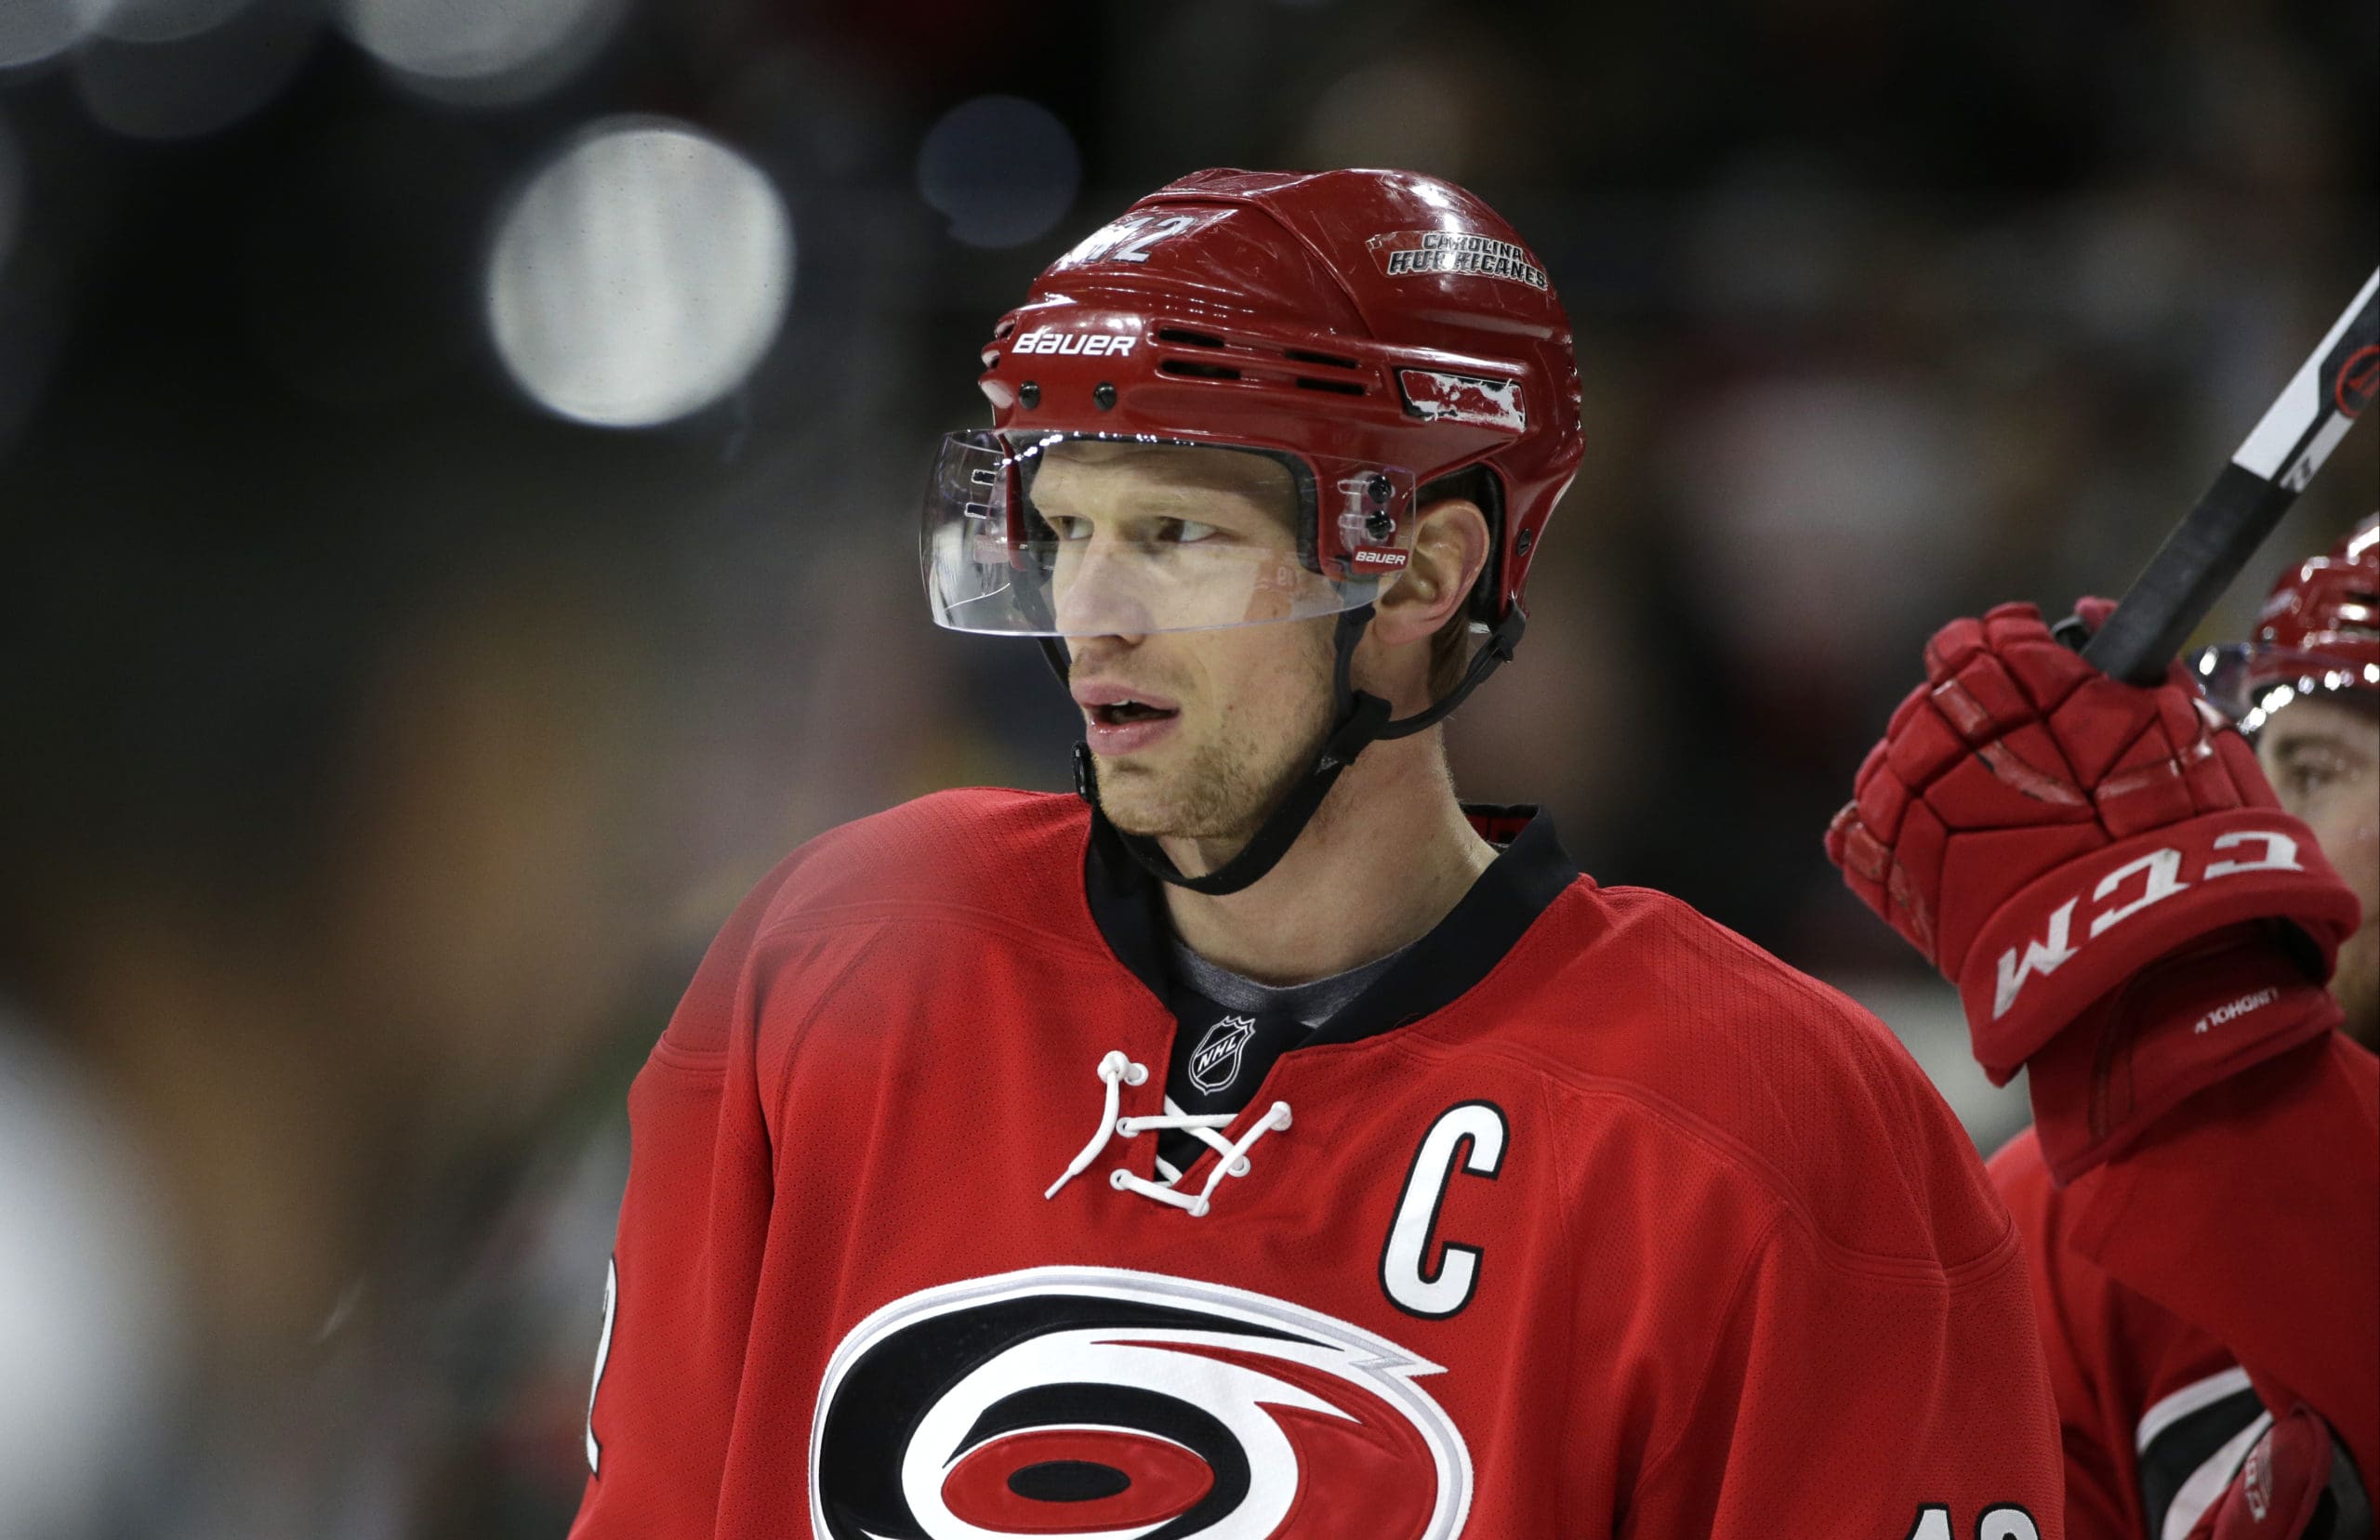 FHN Today: Florida Panthers Win a Staal Reunion